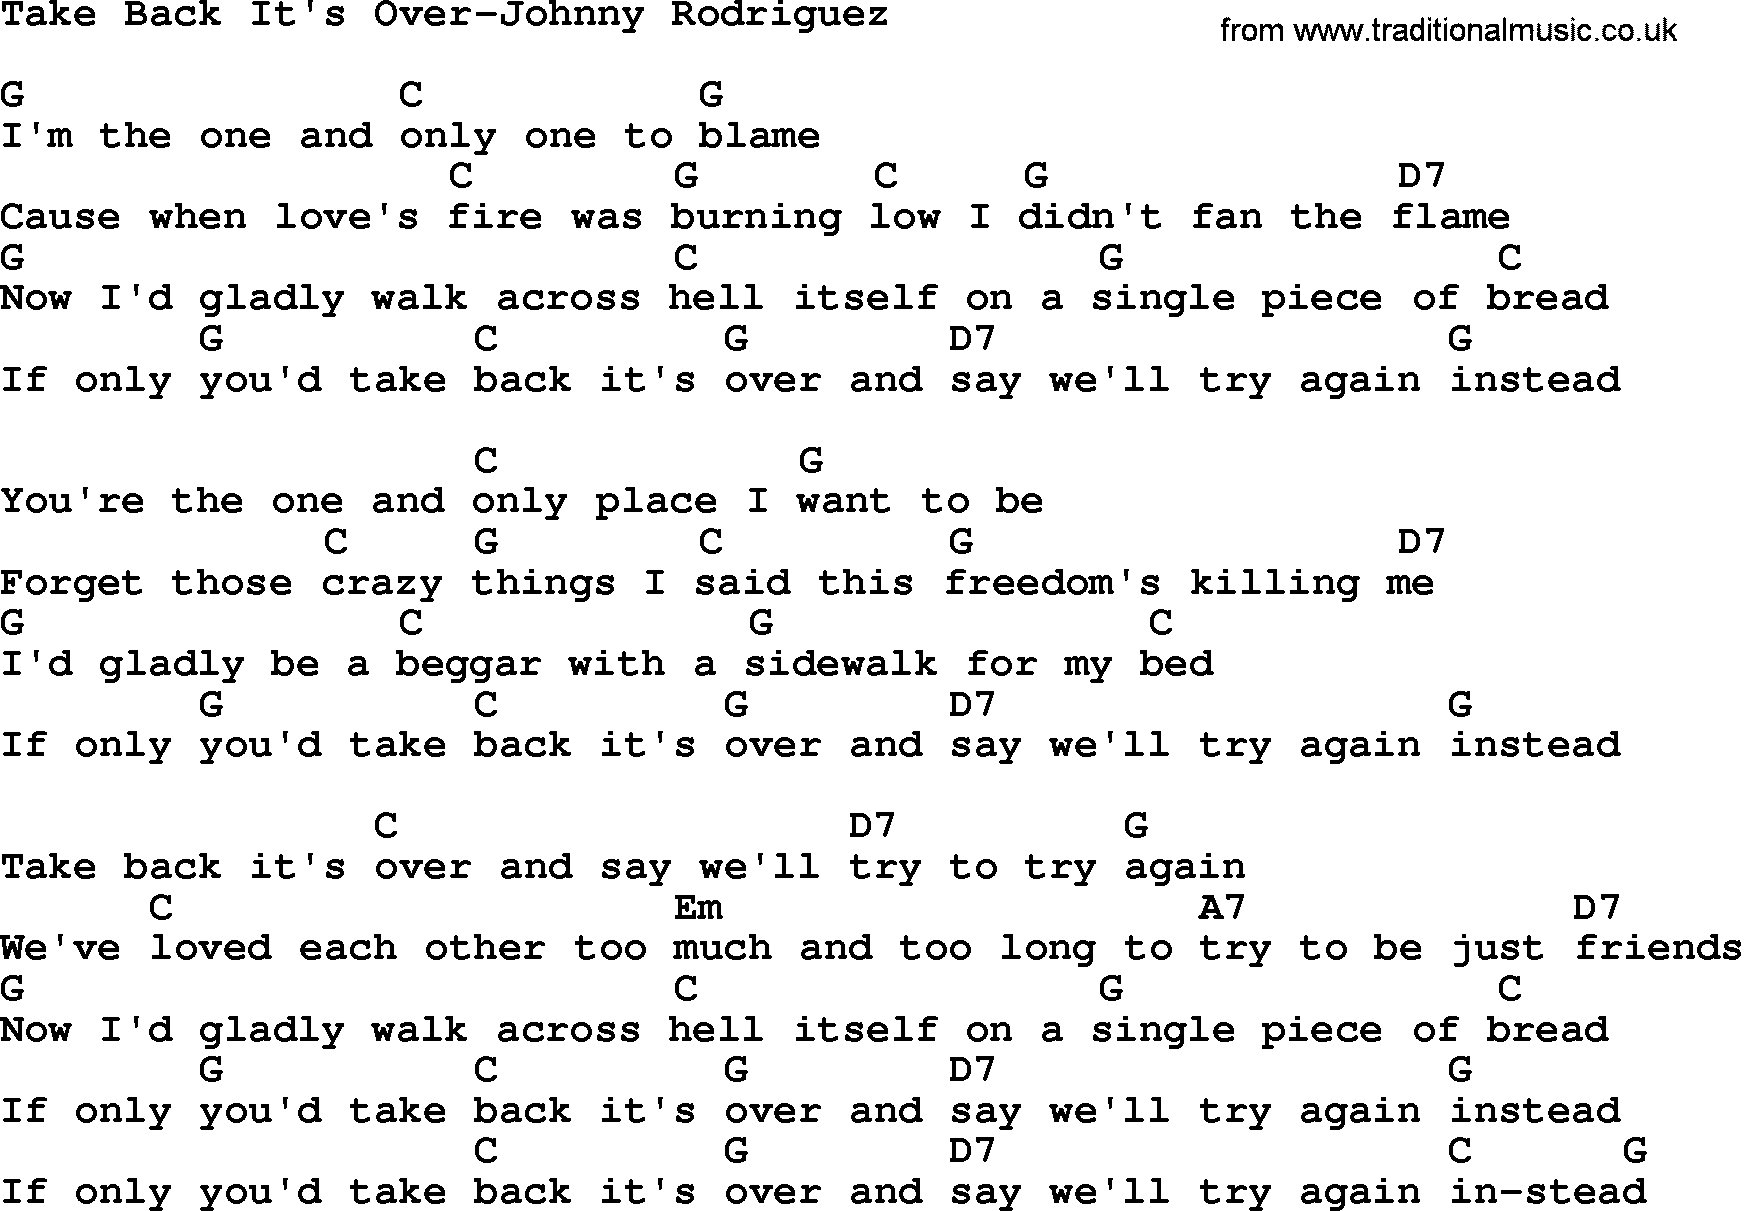 Country music song: Take Back It's Over-Johnny Rodriguez lyrics and chords